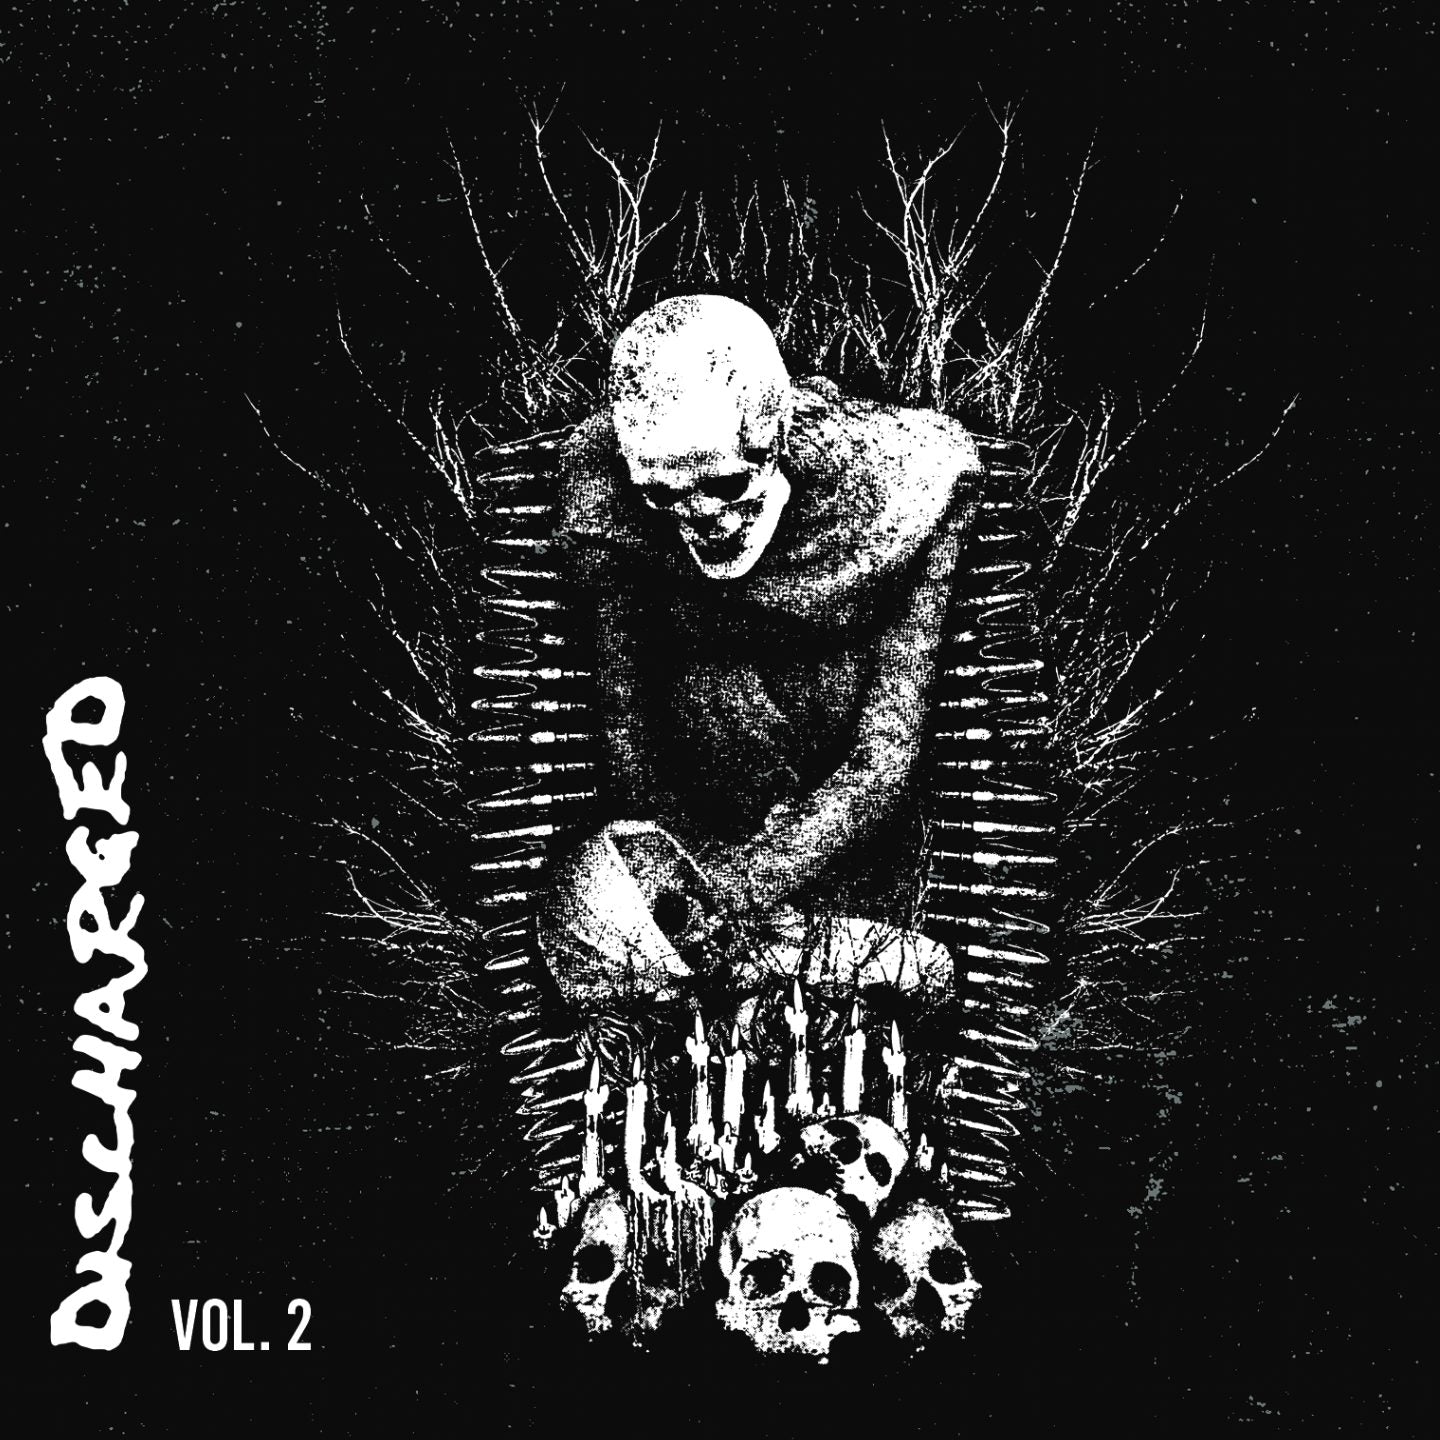 Discharged "Vol.2" - A tribute to Discharge CD compilation